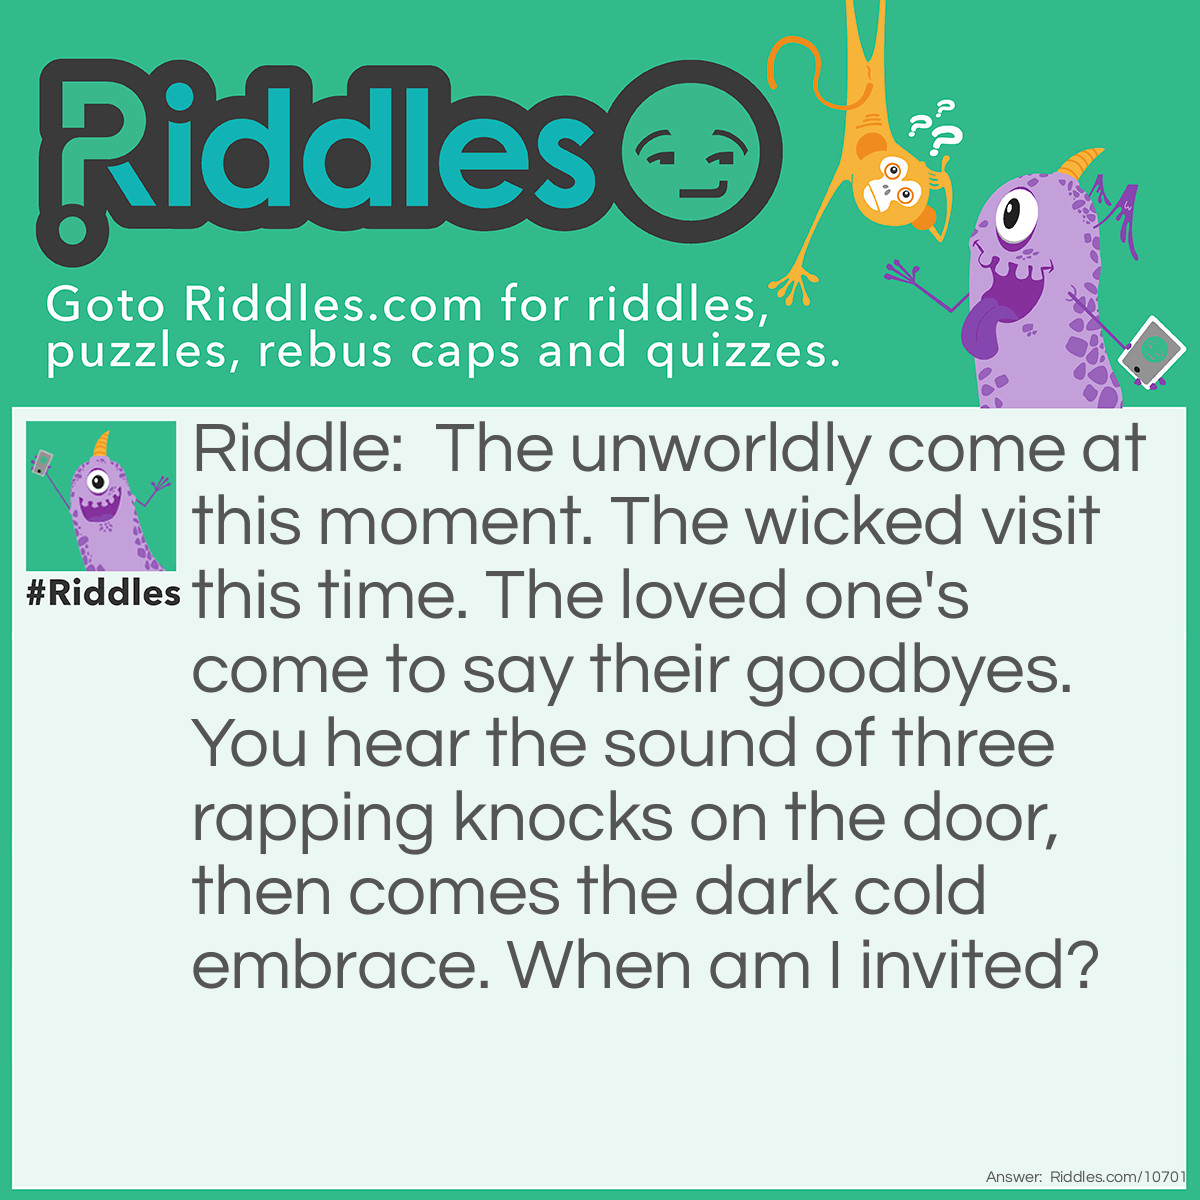 Riddle: The unworldly come at this moment. The wicked visit this time. The loved one's come to say their goodbyes. You hear the sound of three rapping knocks on the door, then comes the dark cold embrace. When am I invited? Answer: 3AM.